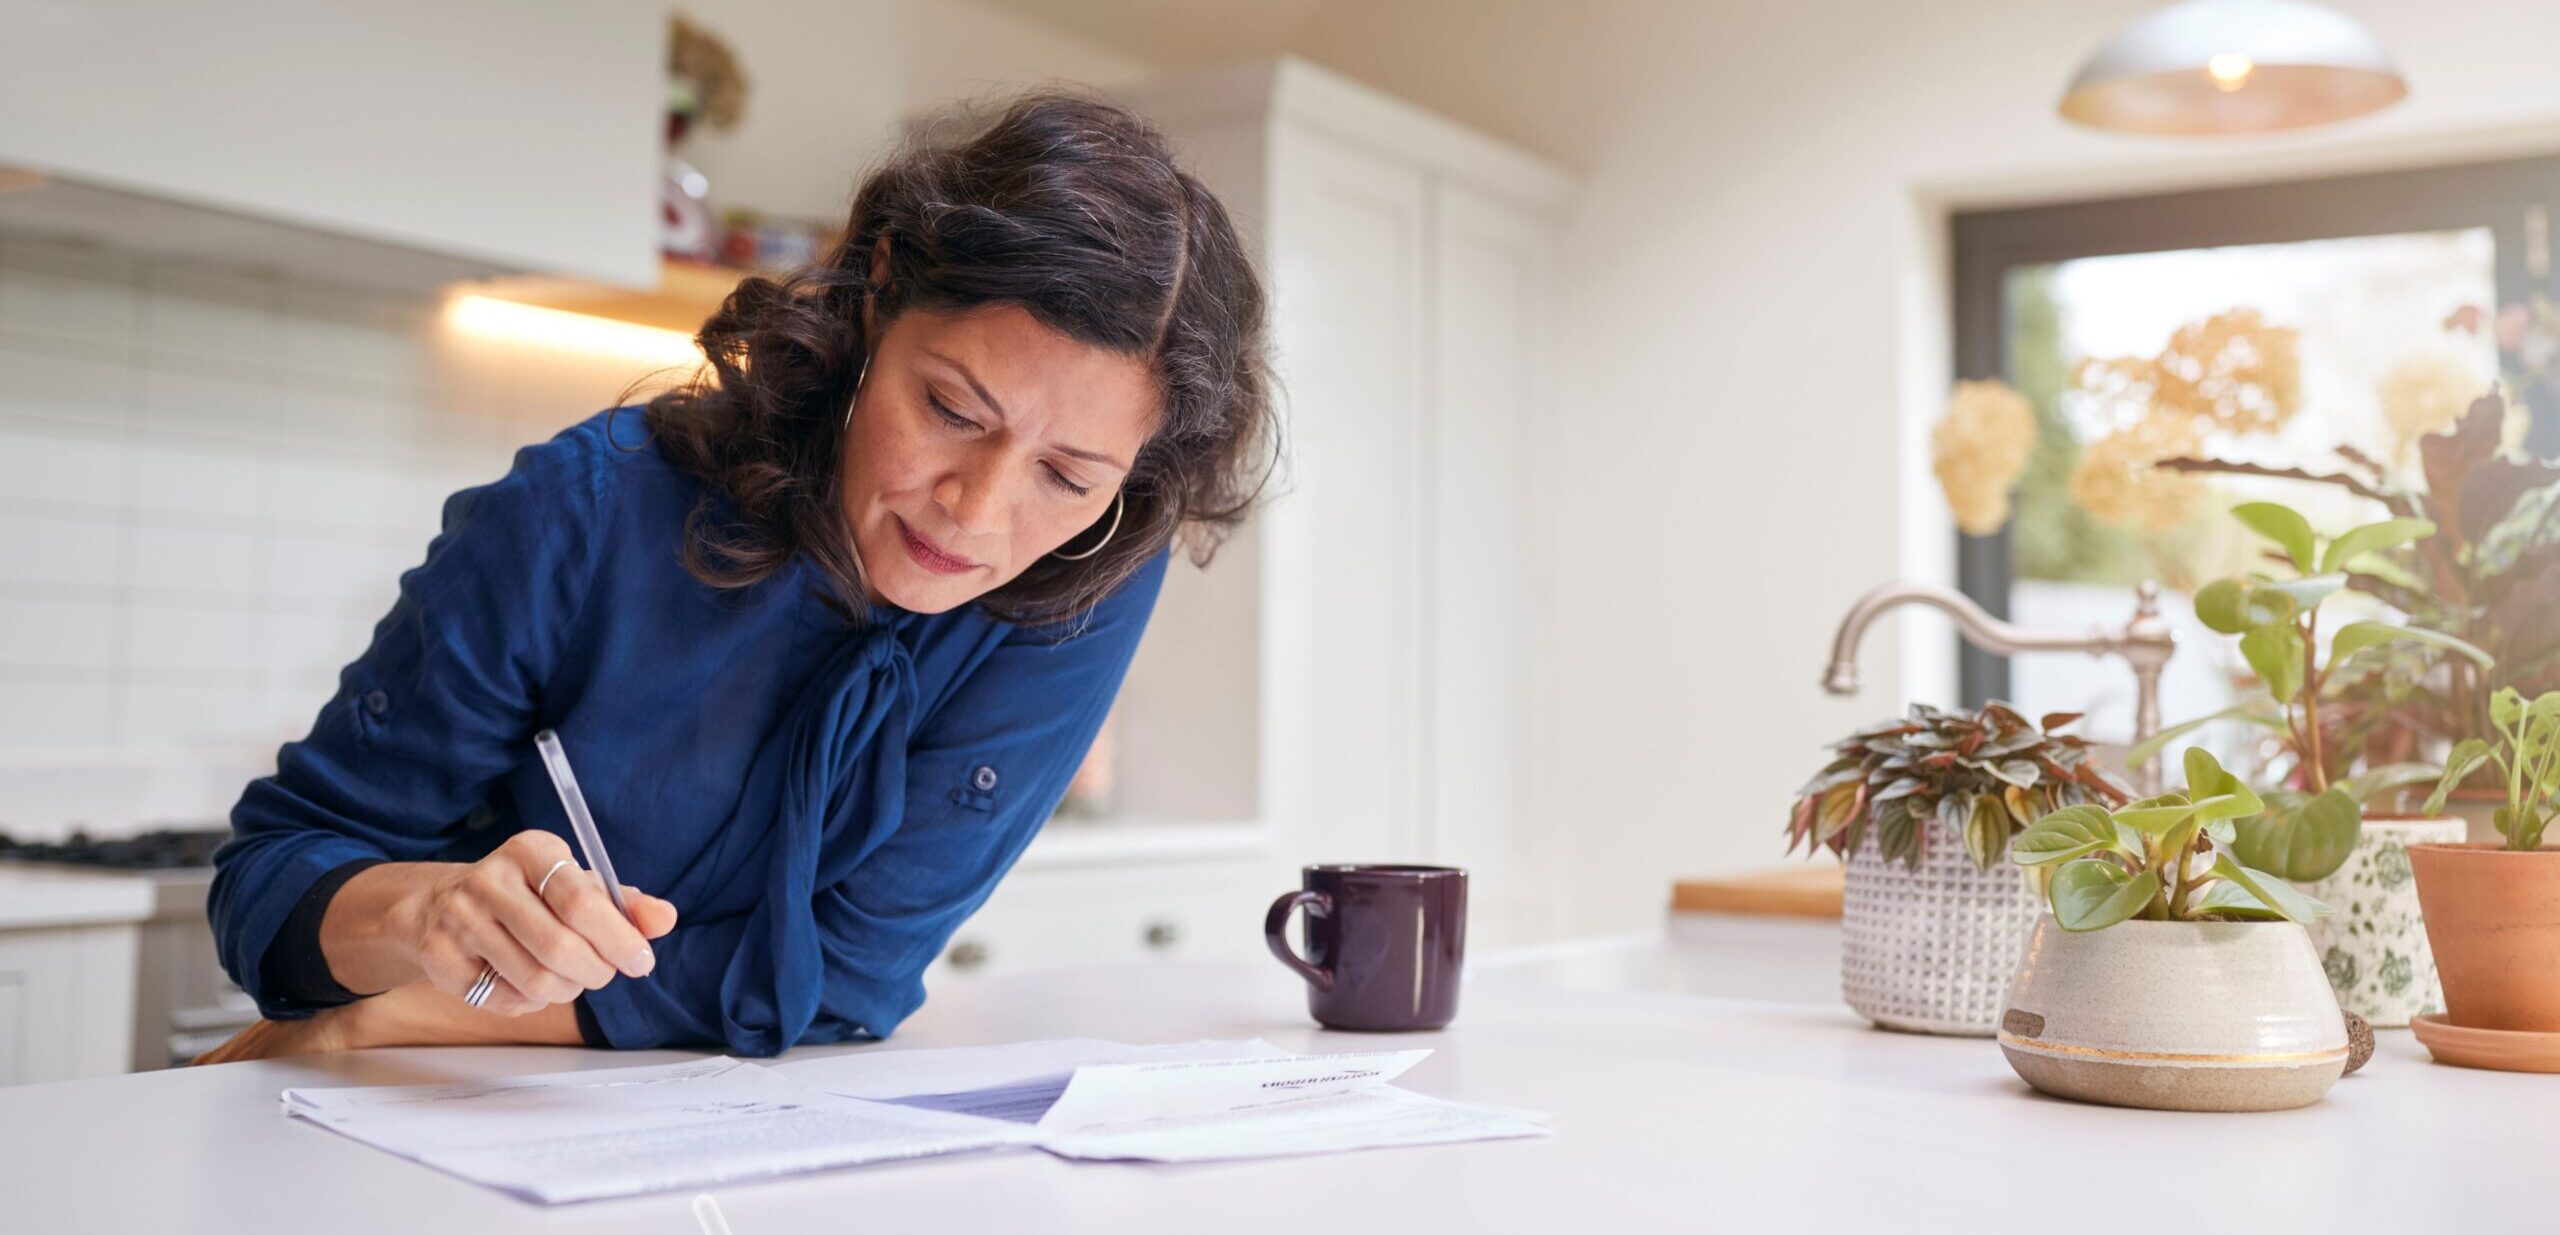 A woman leans over her kitchen counter, holding a pen and reviewing a set of paper documents.